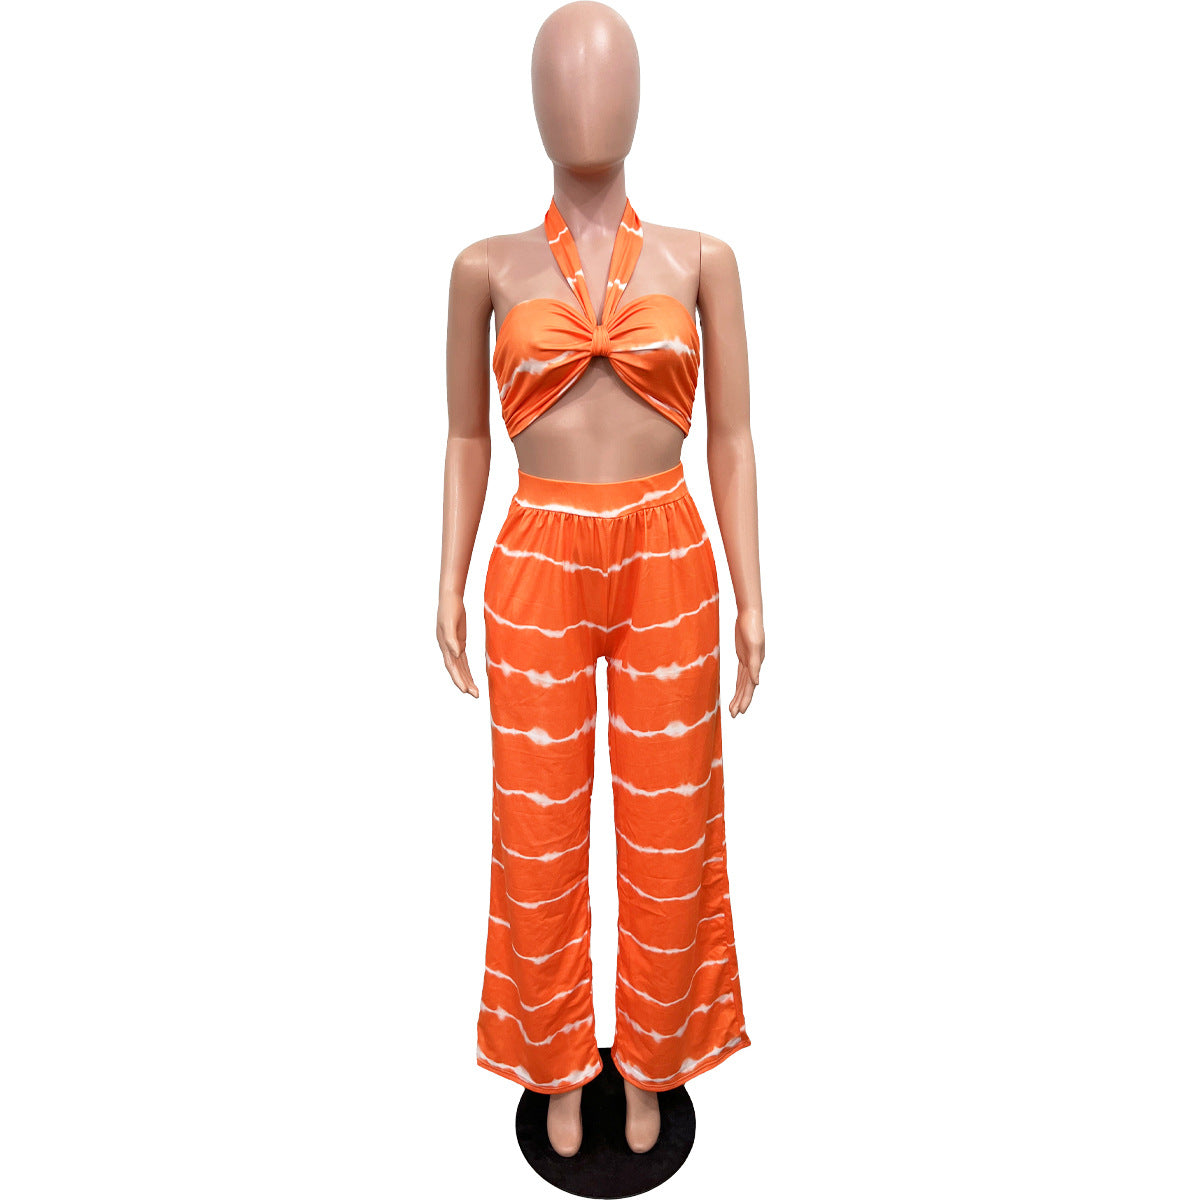 BamBam Women Stripe Print Crop Top and Loose Pocket Trousers Two-Piece Set - BamBam